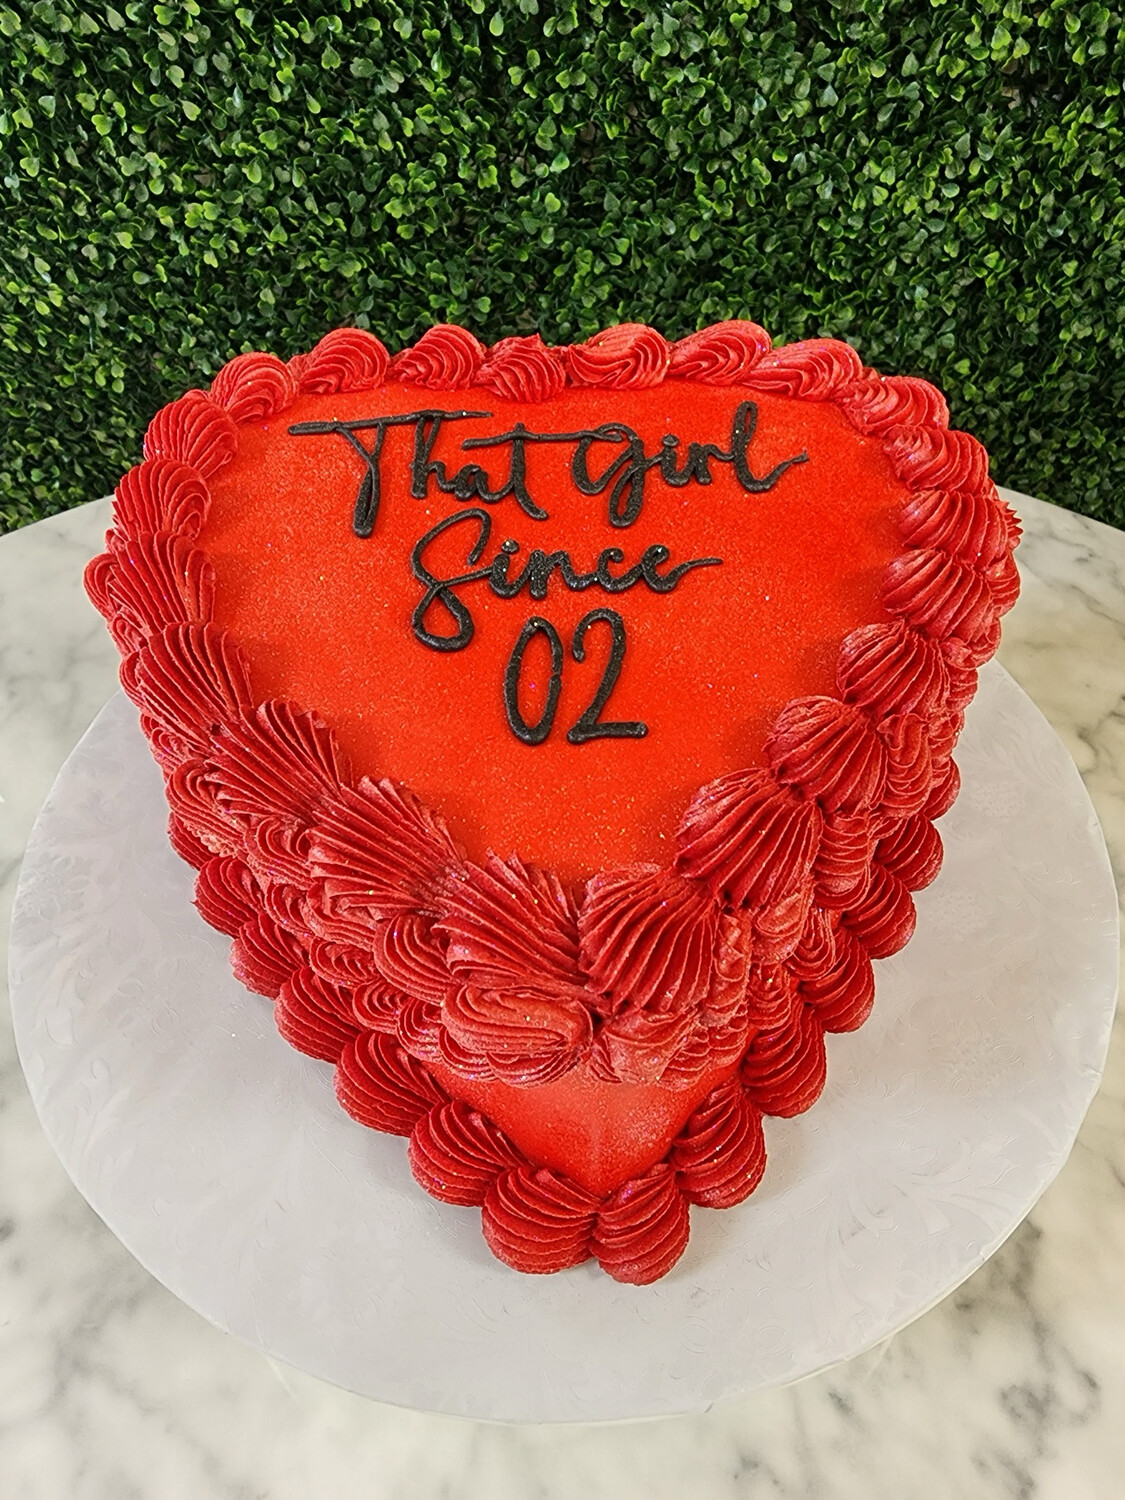 Vintage Heart Cake- “That girl since…” with sparkle!